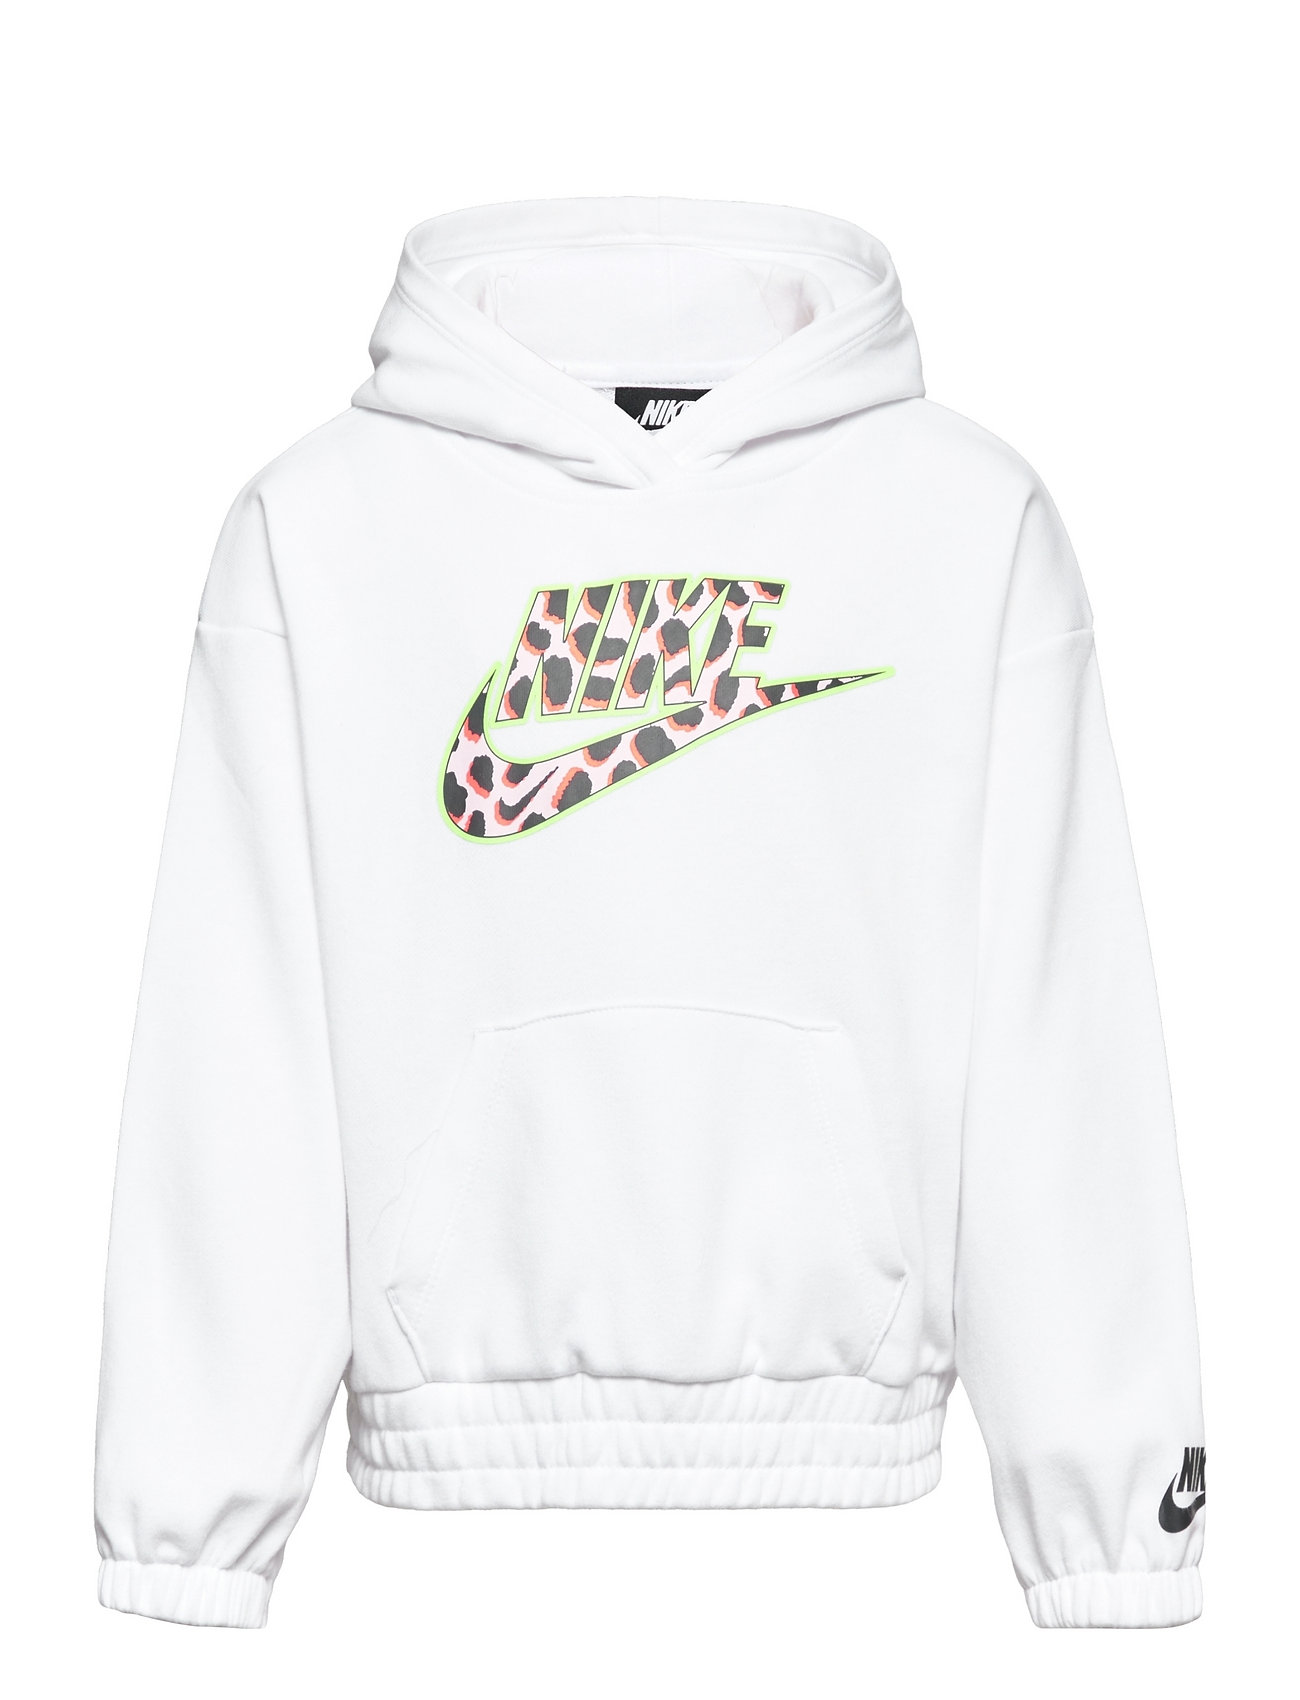 On The Spot Pullover Hoody, On The Spot Pullover Hoody Sport Sweat-shirts & Hoodies Hoodies White Nike